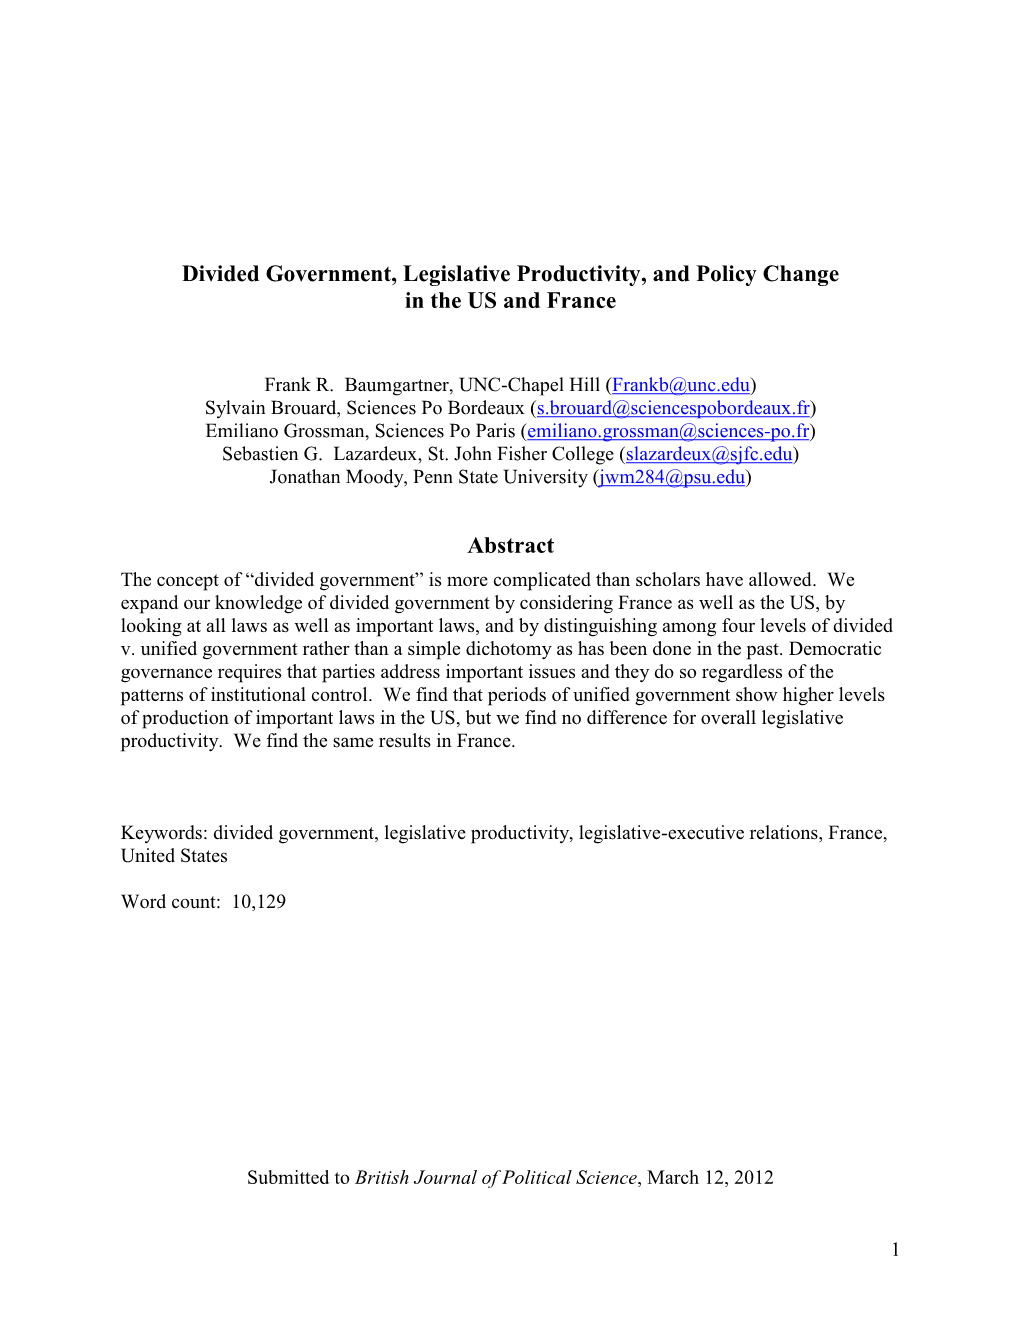 Divided Government, Legislative Productivity, and Policy Change in the US and France